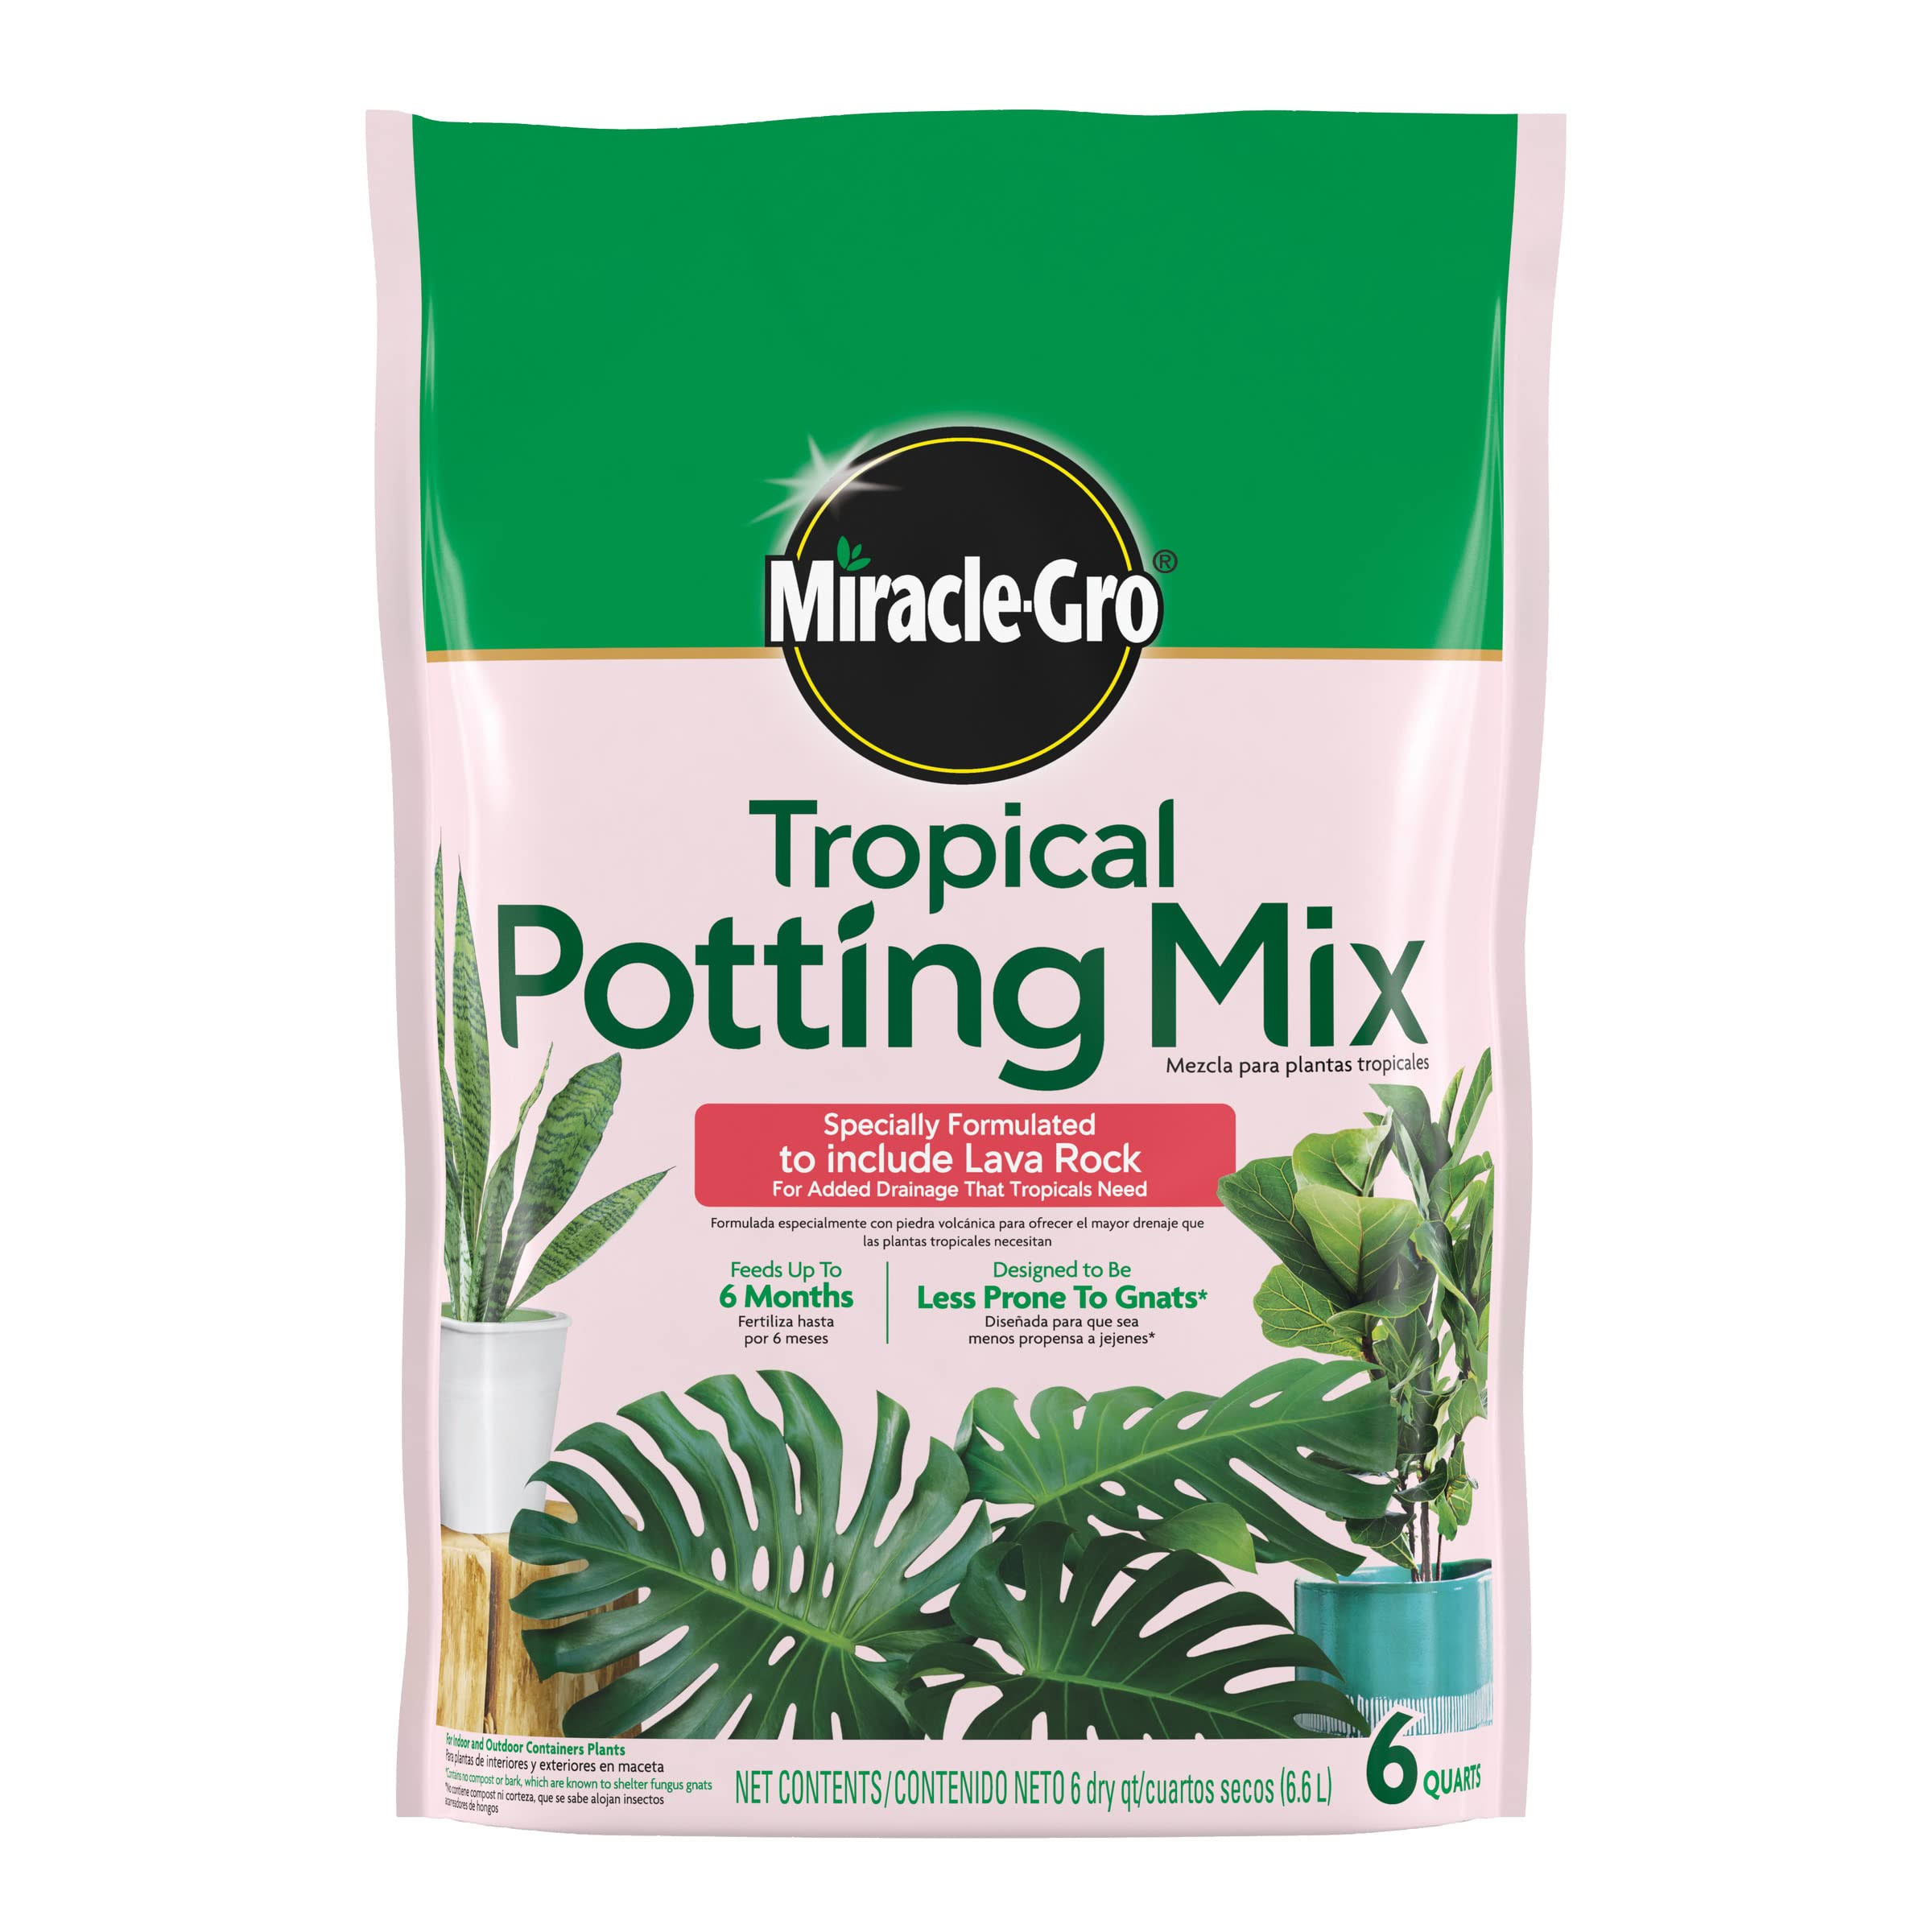 Miracle-Gro Tropical Potting Mix, 6 QT - Growing Media for Tropical Plants Living in Indoor and Outdoor Containers